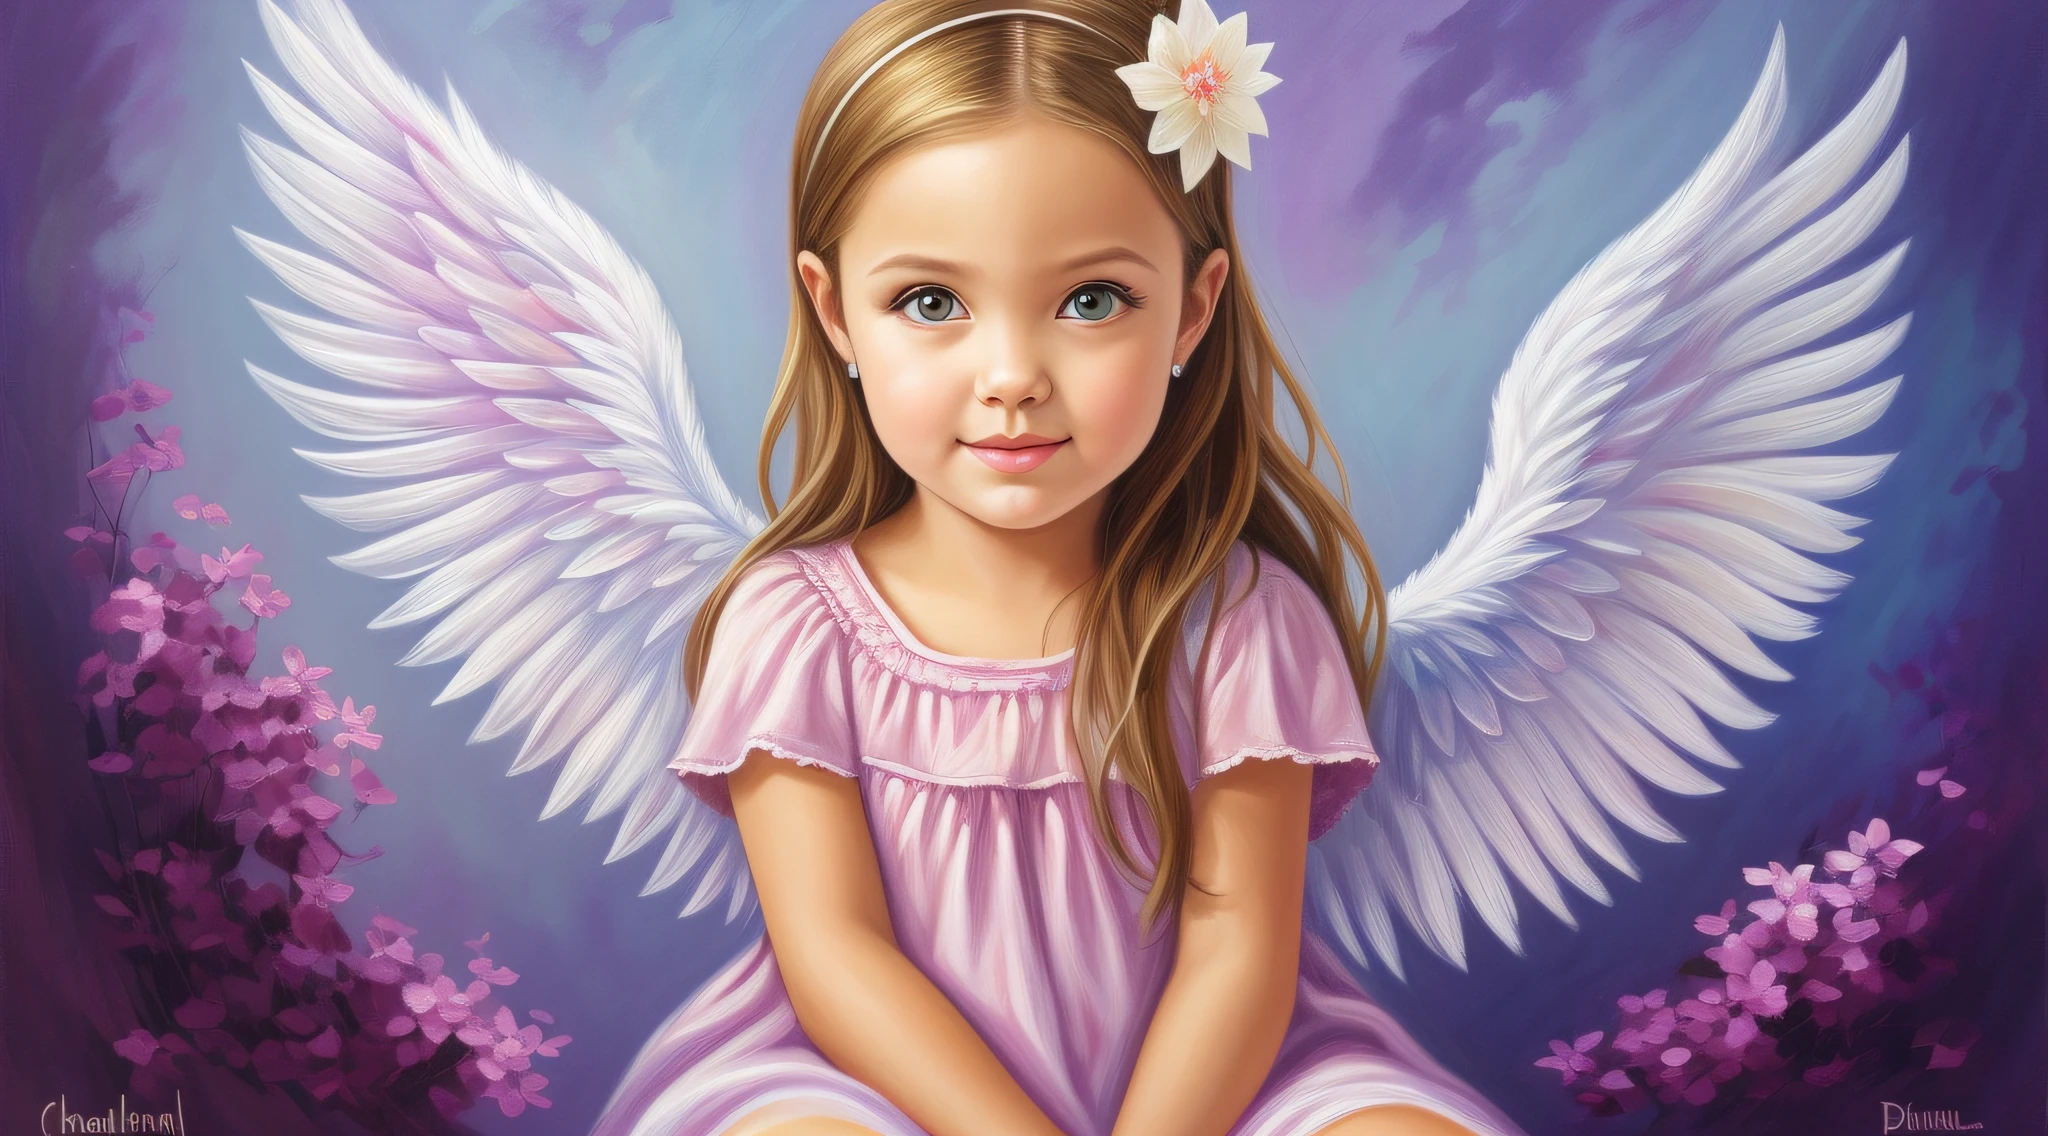 painting of a  with angel wings sitting on a cloud, beautiful angel, of beautiful angel, of an beautiful angel girl, portrait of a beautiful angel, angel girl, adorable digital painting, beautiful angel girl portrait, angel, angel-themed, cherub, full of paintings of angels, angelic face, angelical, angel face, beautiful female angel, angels --auto --s2